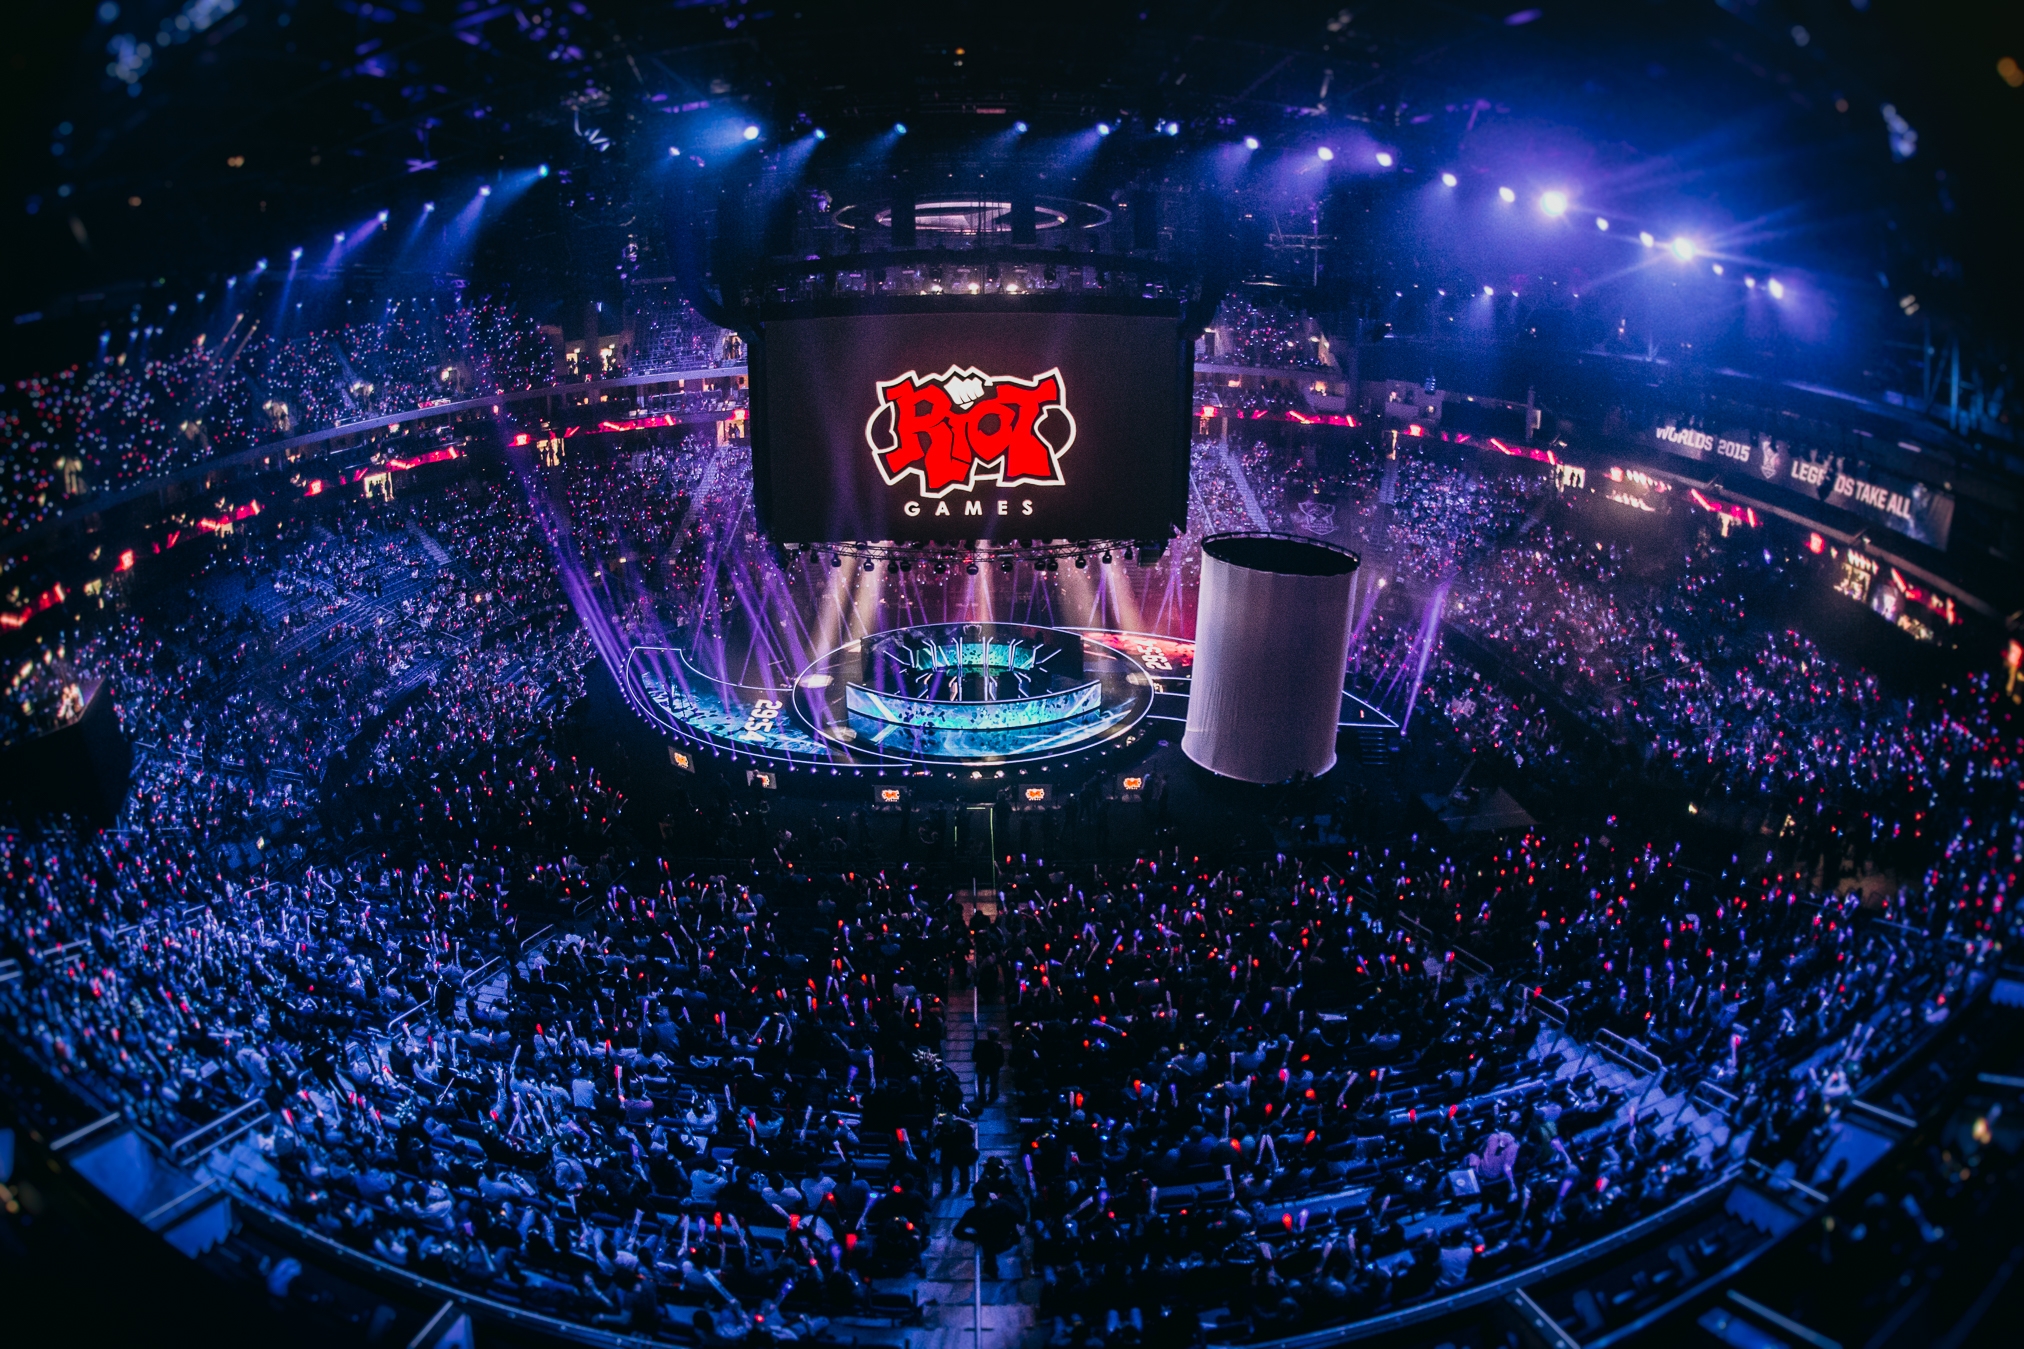 The League of Legends Worlds finals showed the heart and soul of esports